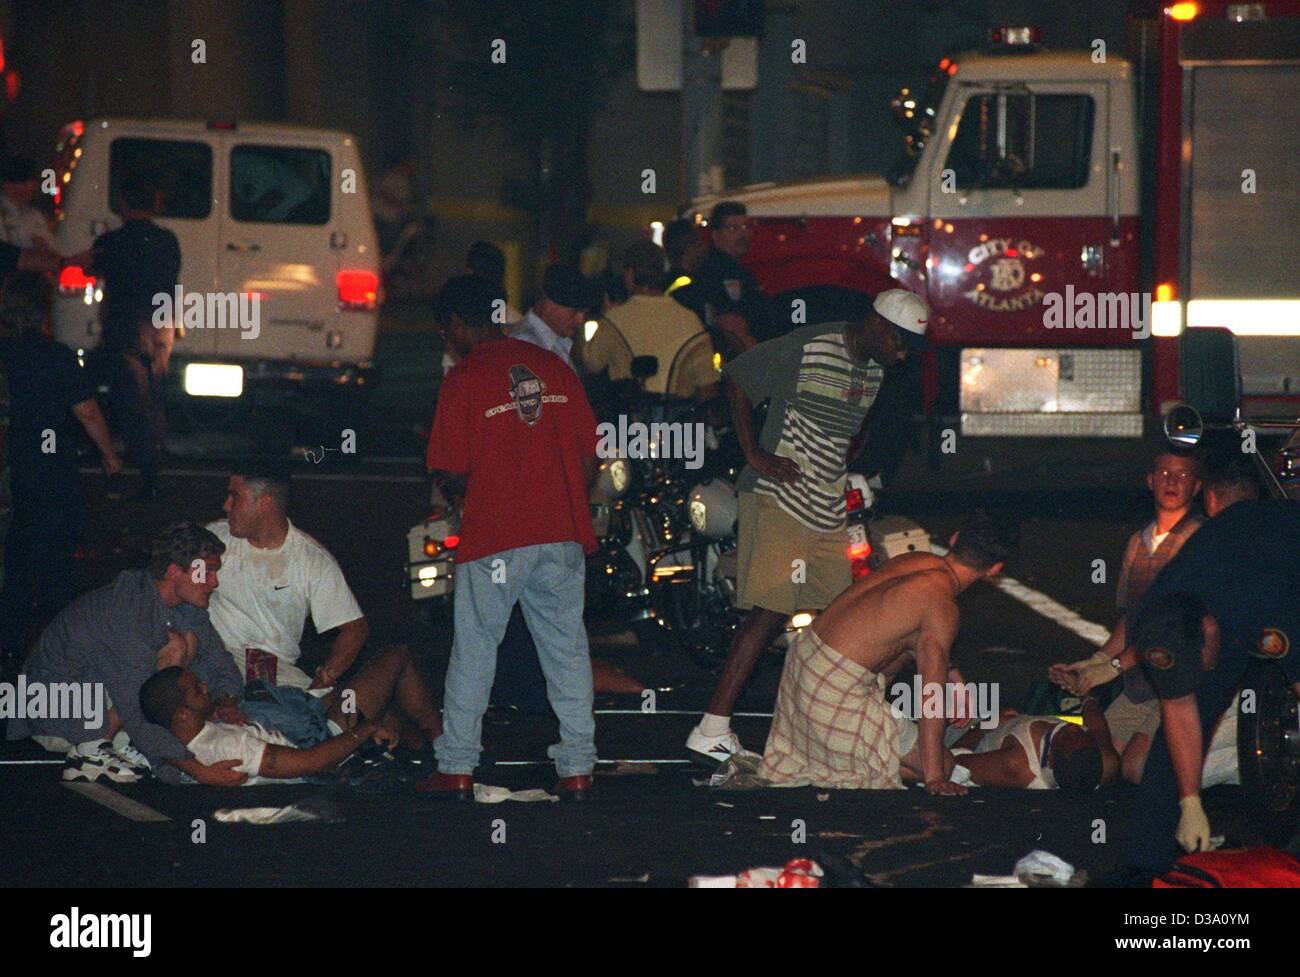 (dpa files) - Medical attendants are giving first aid to the victims of a bomb attack during the Summer Olympic Games in Atlanta, 27 July 1996. Two people were killed, 111 injured. The Games, however, were not cancelled. Stock Photo